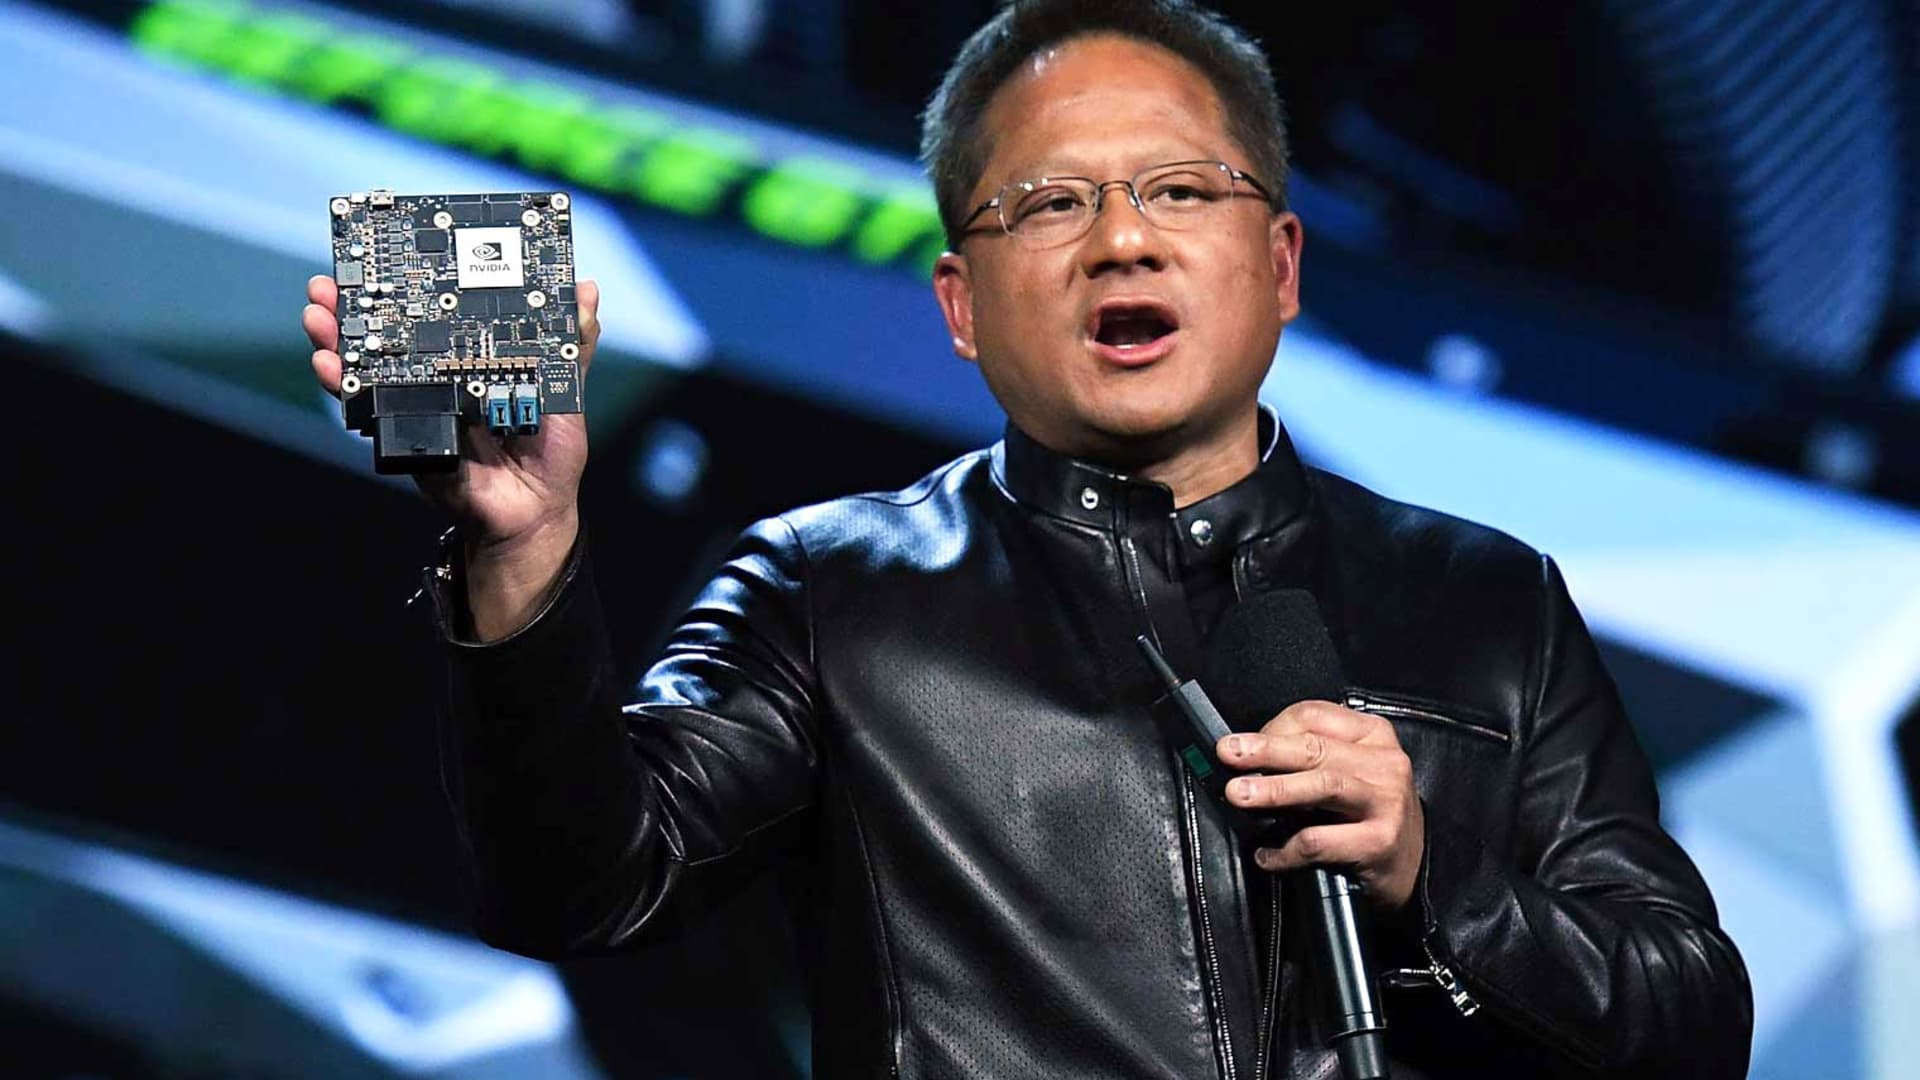 Nvidia tops estimates and says sales will jump 170% this quarter, driven by demand for AI chips